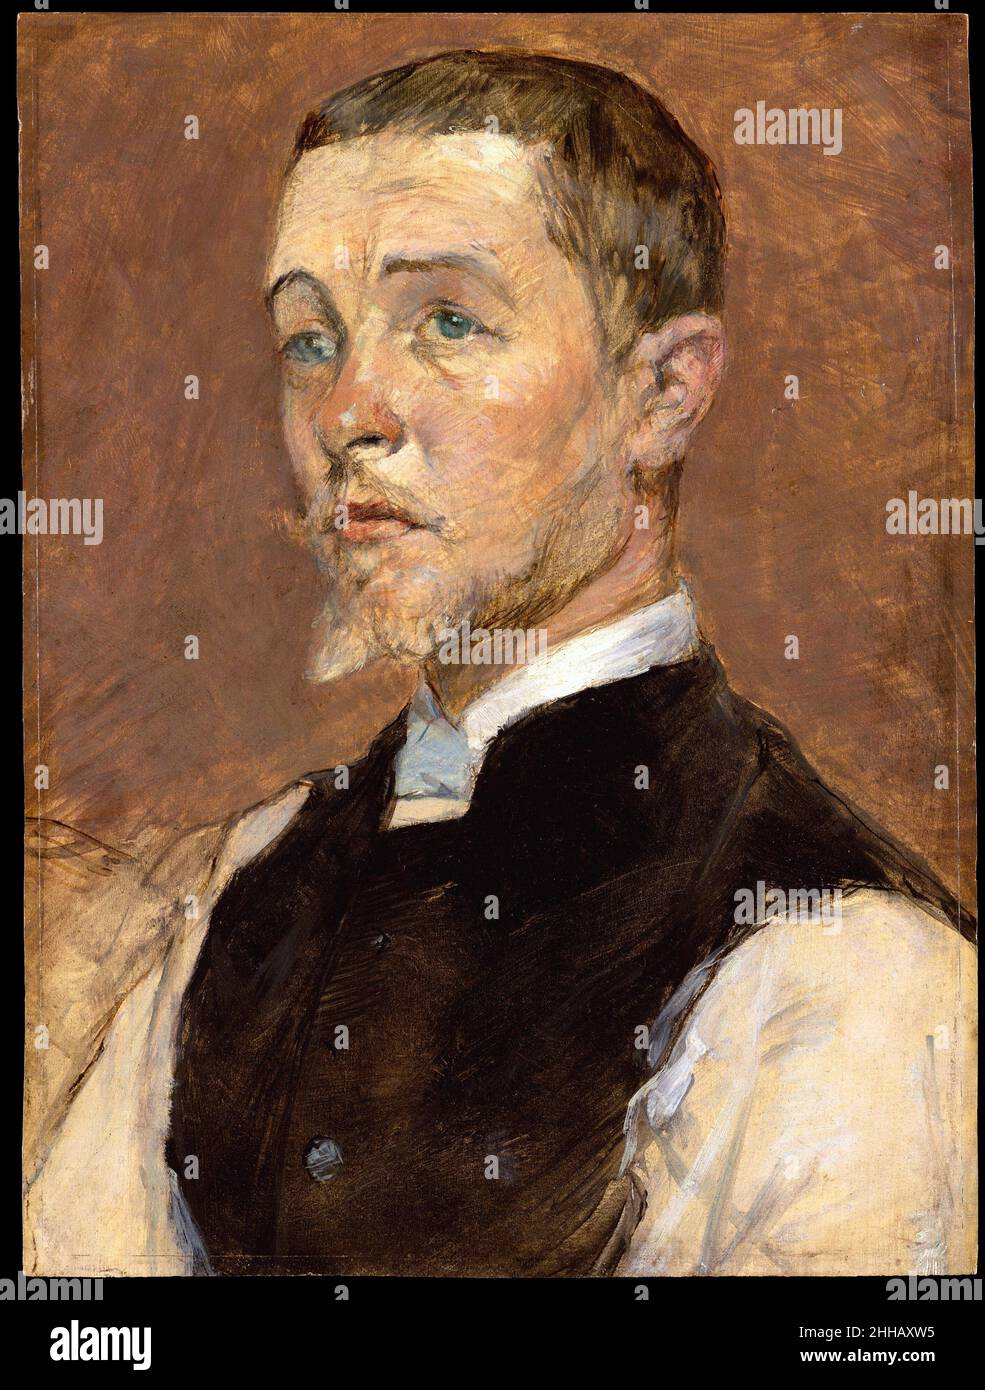 Albert (René) Grenier (1858–1925) 1887 Henri de Toulouse-Lautrec French Grenier and Lautrec were fellow students in the Paris atelier of academic history painter Fernand Cormon during the 1880s and became fast friends: Lautrec even lived briefly with Grenier and his mistress, Lili, an actress and model, and made several portrayals of the couple. An inscription on the verso of this portrait indicates that it was painted in Lautrec’s Montmartre studio in the rue Caulaincourt in 1887. He employed thin, watercolor-like washes of pigment, laid over a fine pencil underdrawing, to produce a sensitive Stock Photo